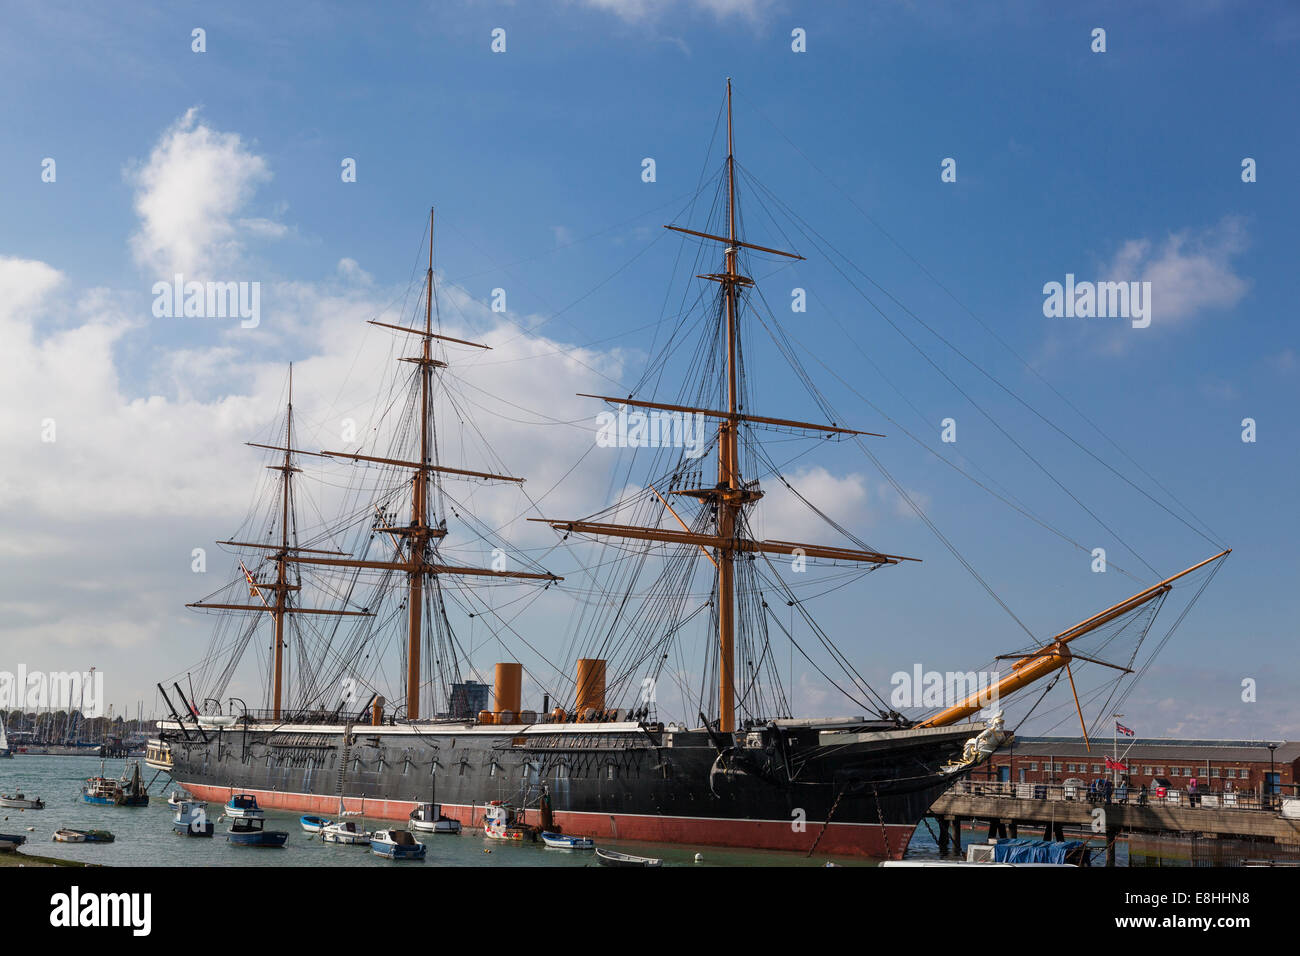 The iron clad HMS Warrior berthed in the Royal Naval Dockyard in Portsmouth, the largest warship when commissioner in 1861. Stock Photo